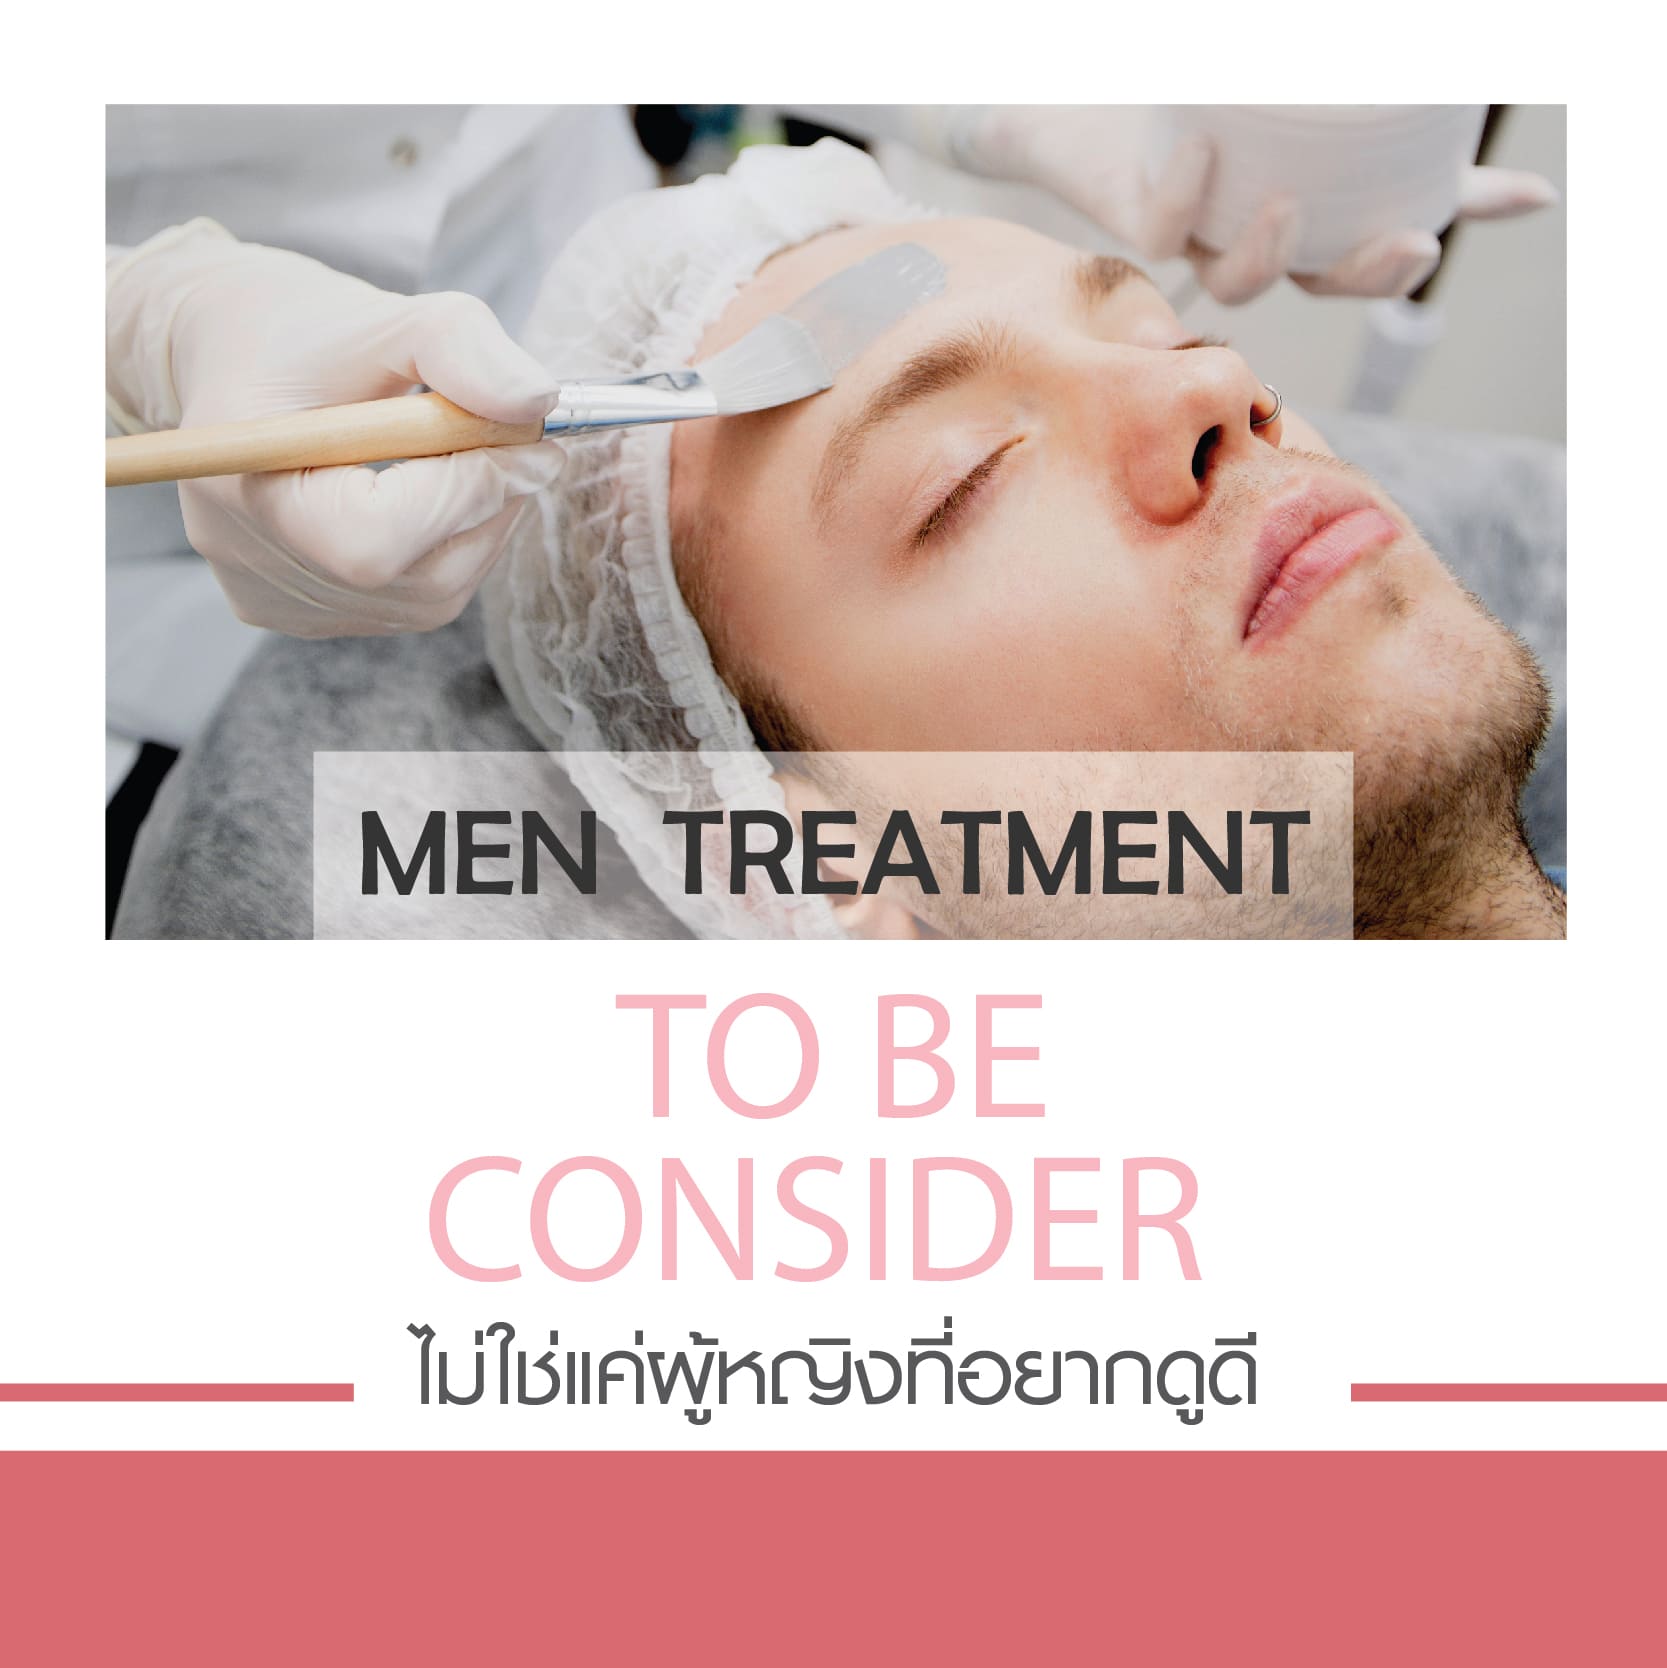 Men Treatment to be consider - beauty trend 2021